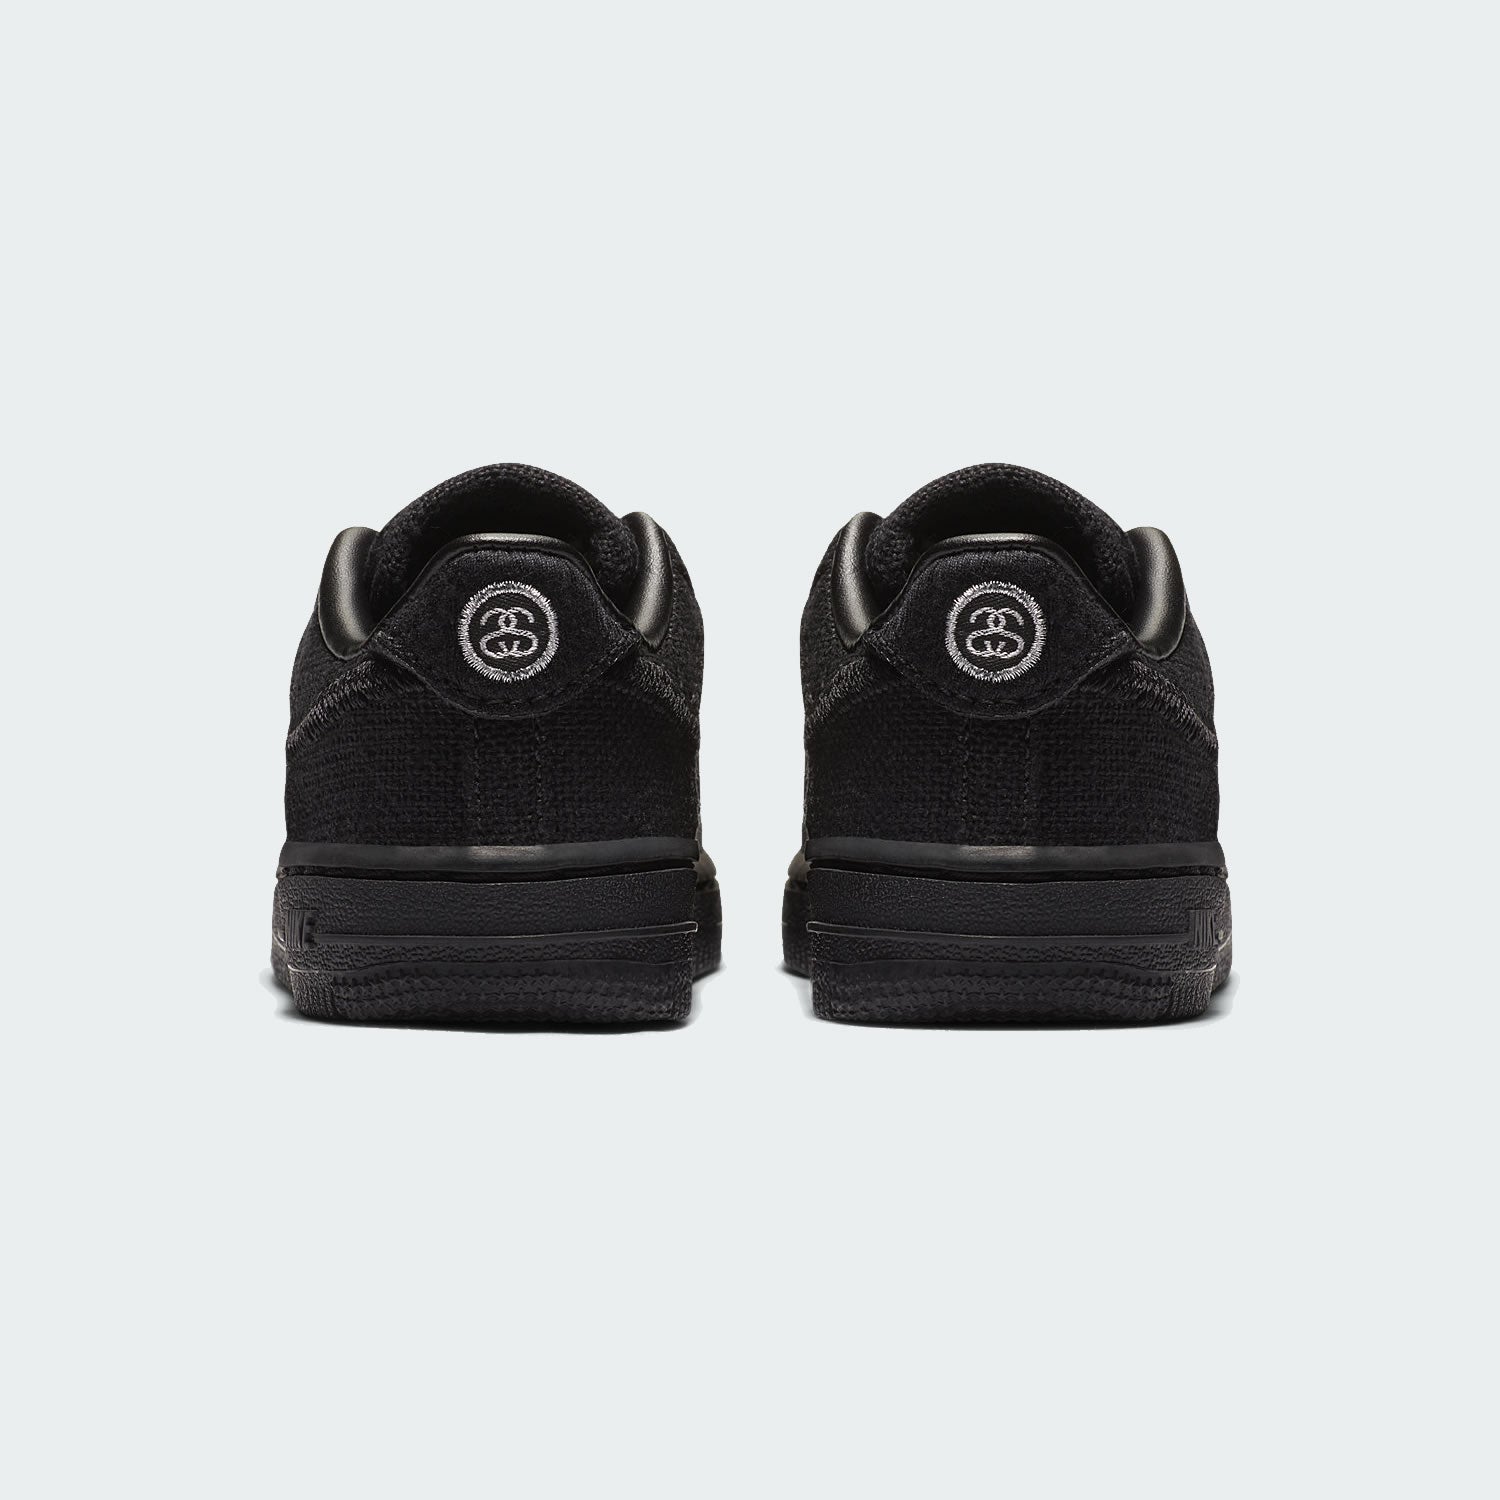 Nike Air Force 1 X Stussy Toddlers (TD) Shoes DC8306 001